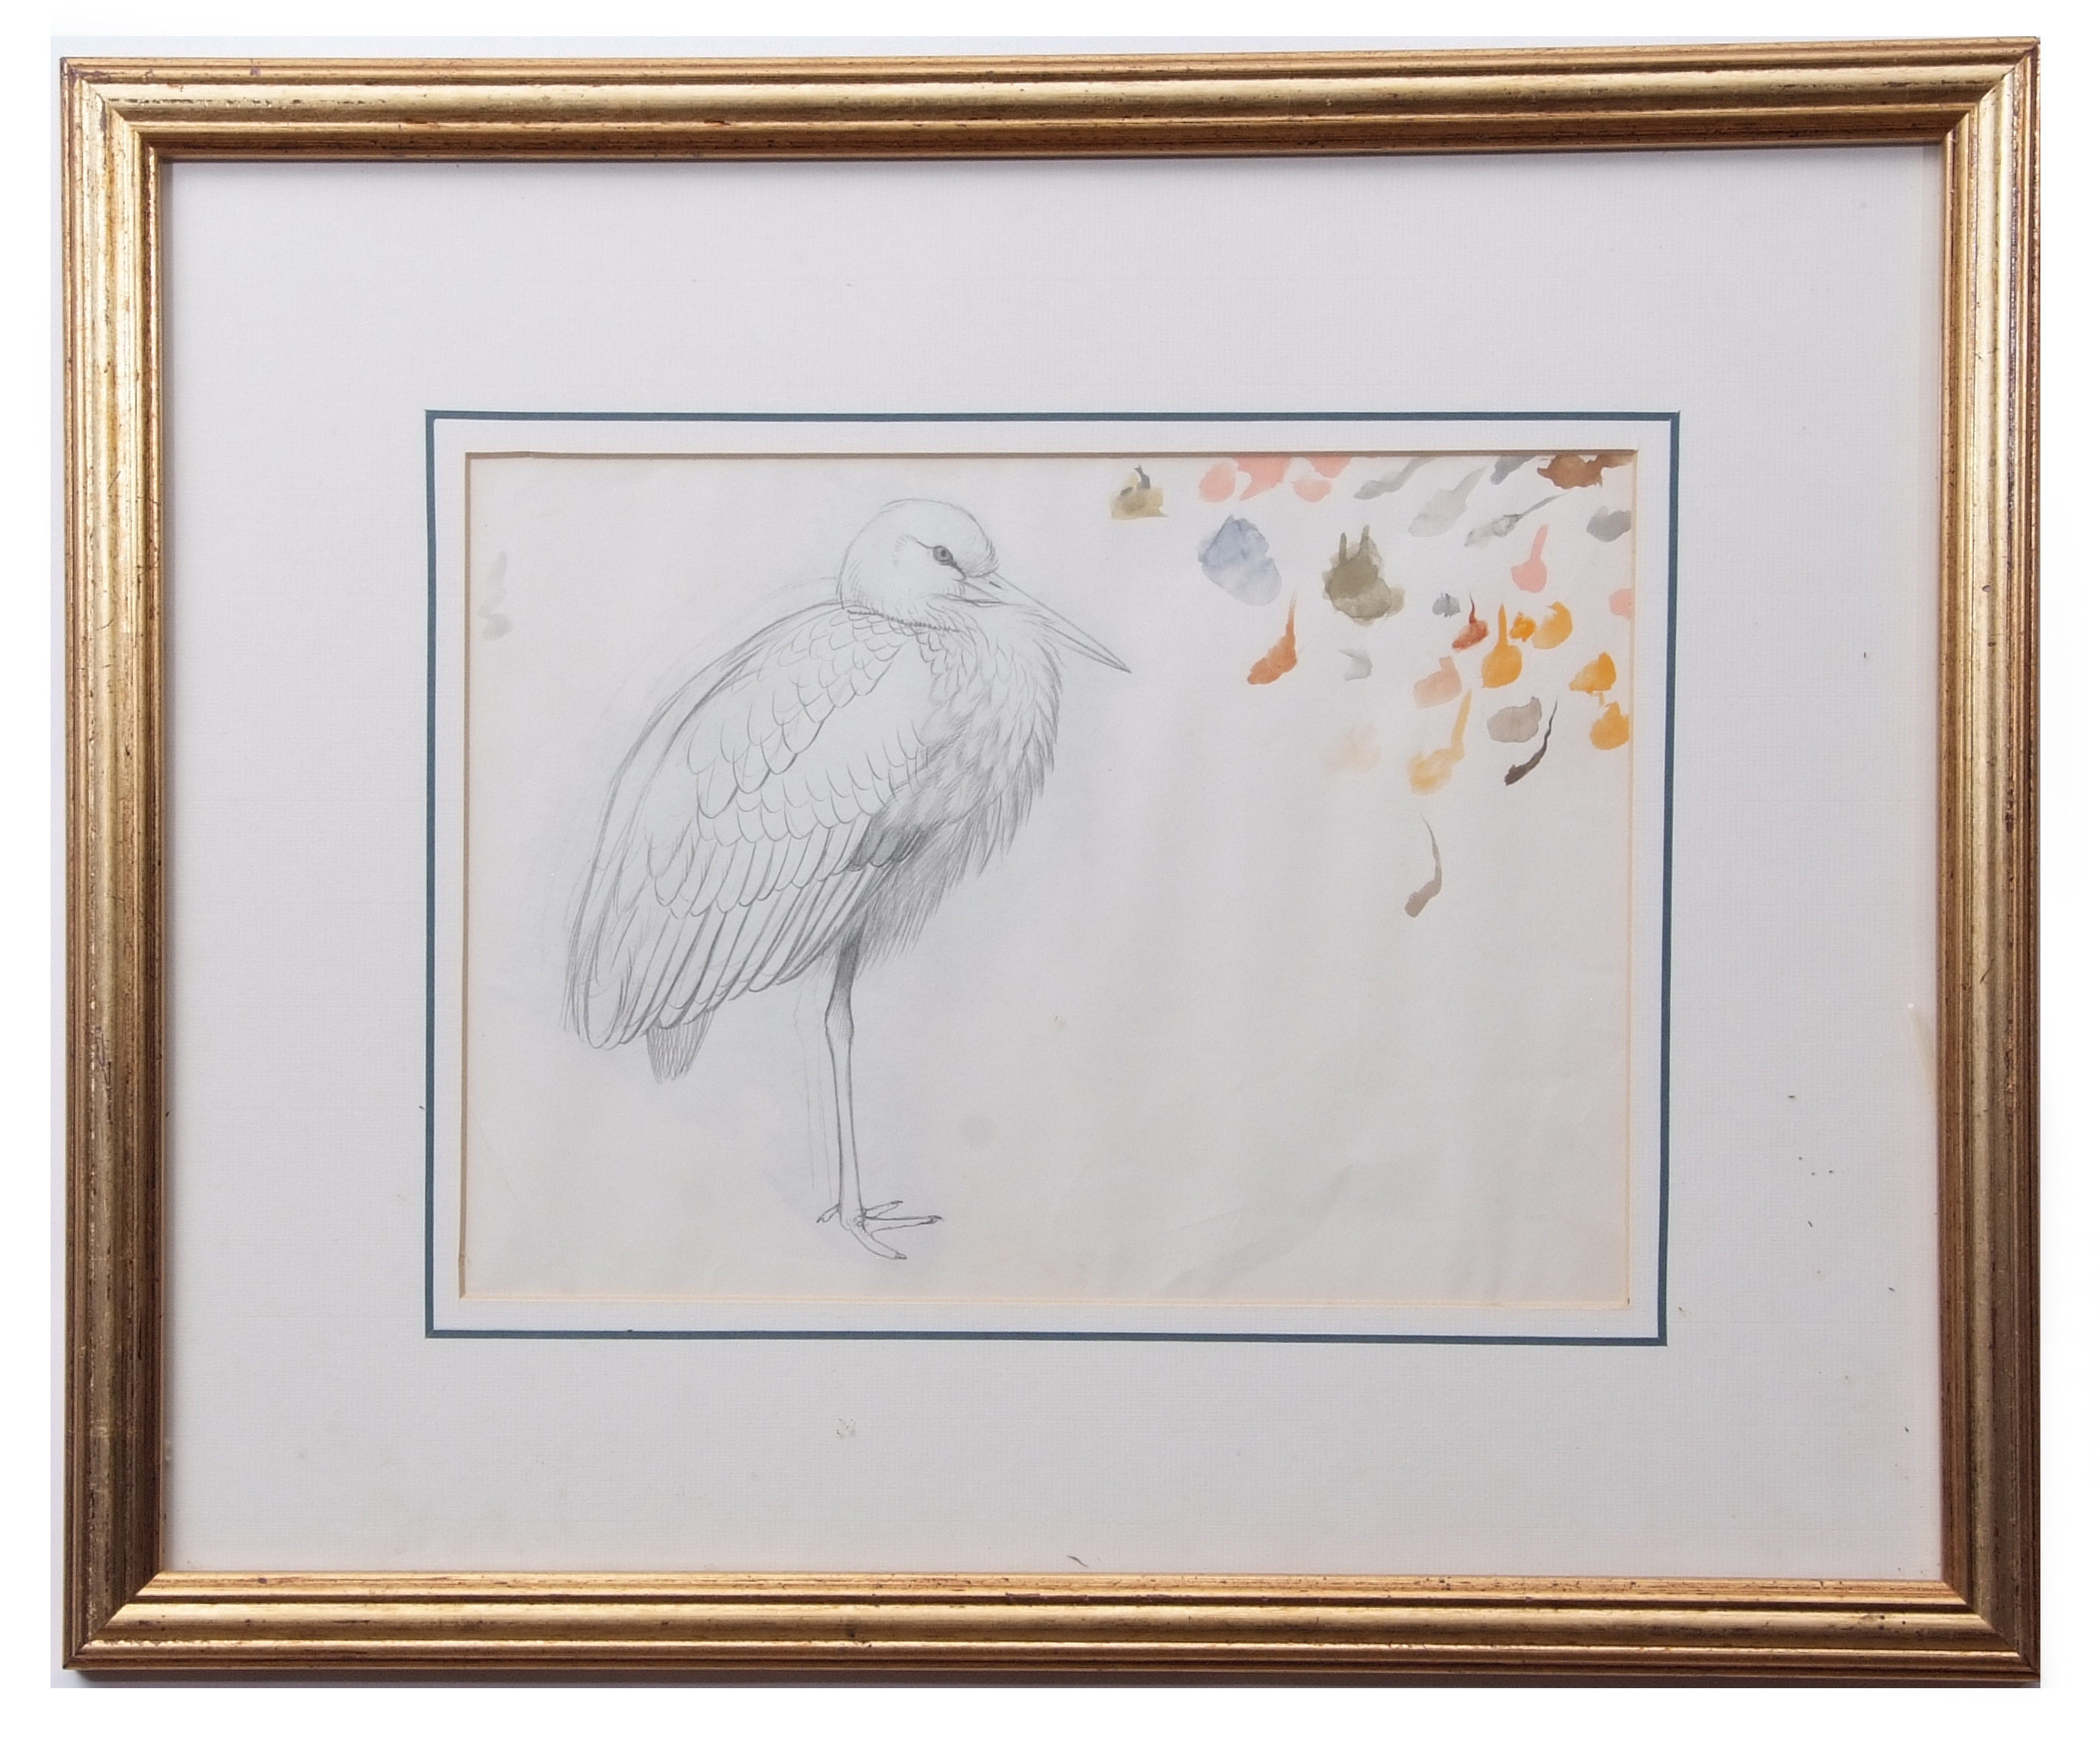 AR DAVID MORRISON HENRY (1919-1977) Bird studies two pencil drawings 17 x 12cms and 19 x 26cms (2) - Image 2 of 3